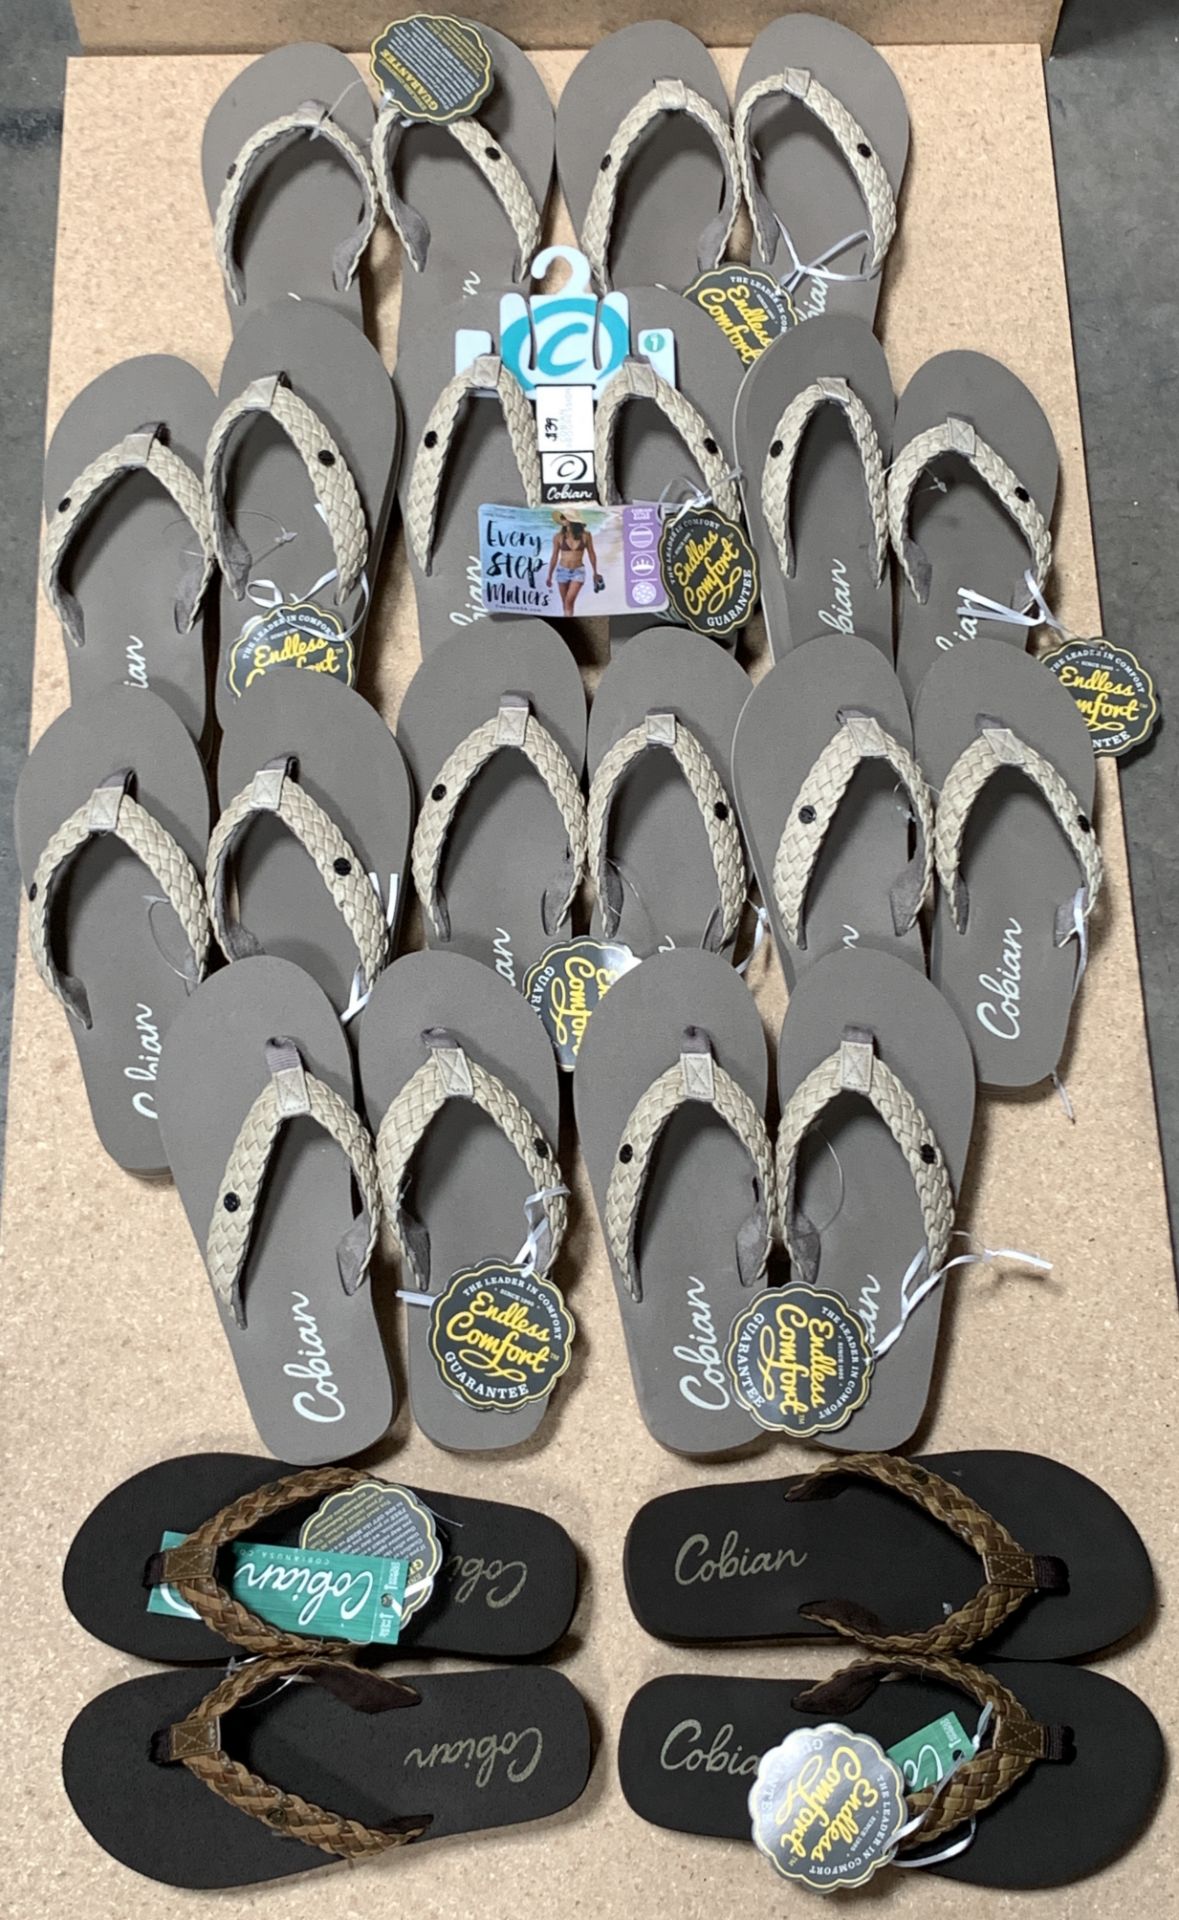 12 Pairs Cobian Flip Flop Sandals, Braided Bounce, New w. Tags, Various Sizes (Retail $468)